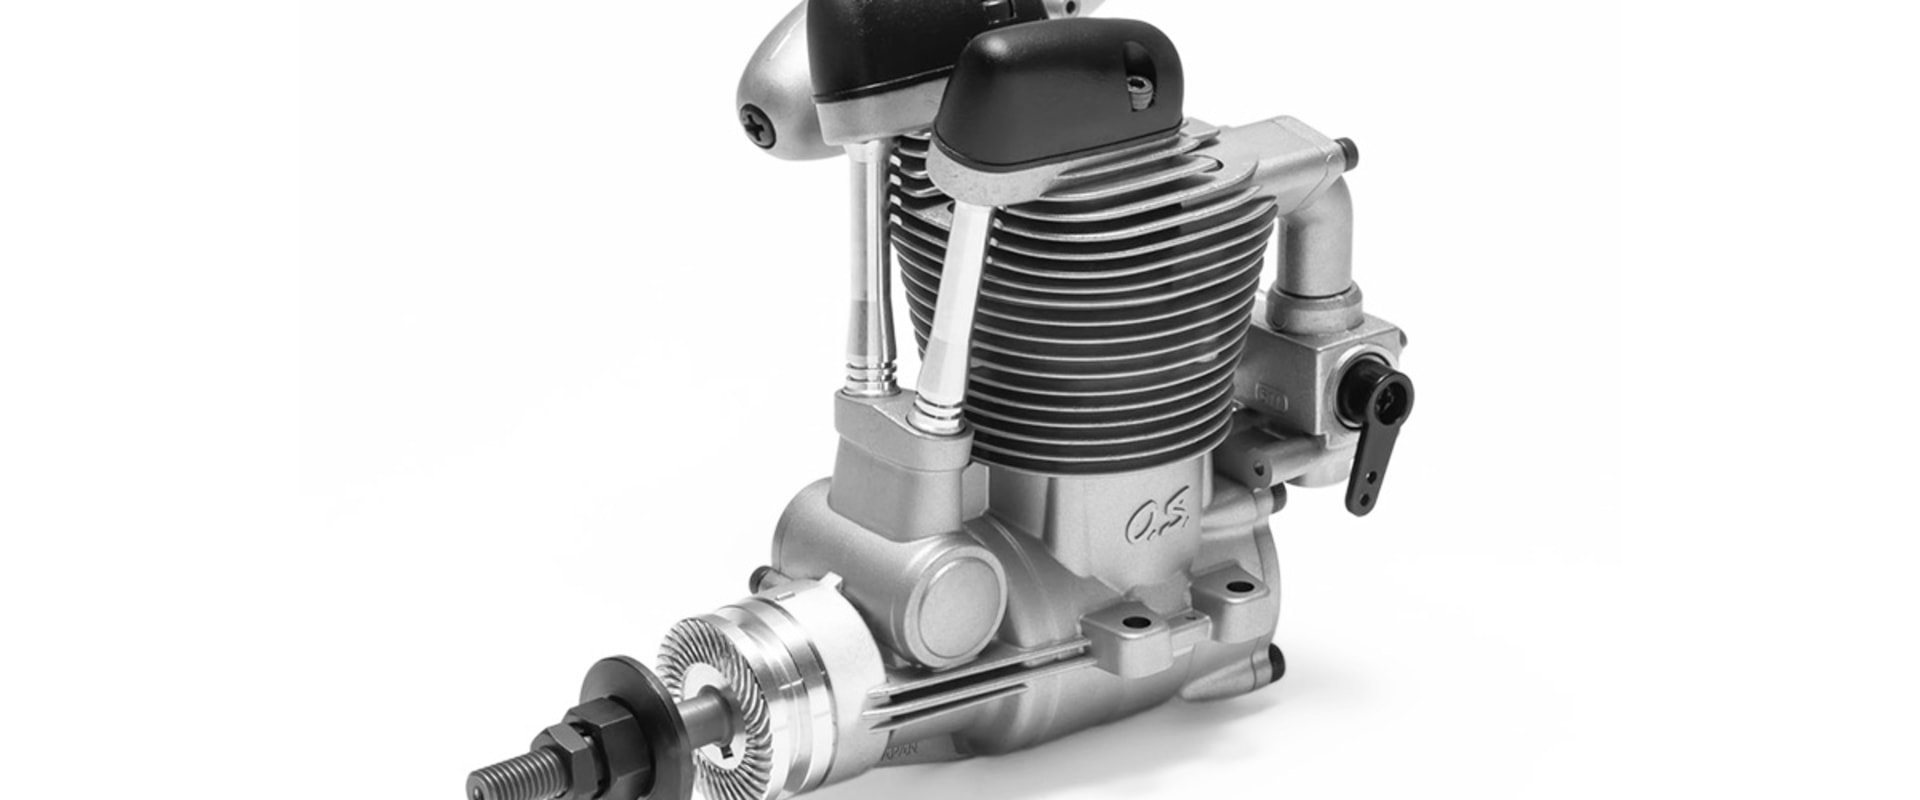 All About Four-Stroke Diesel Replica Engines